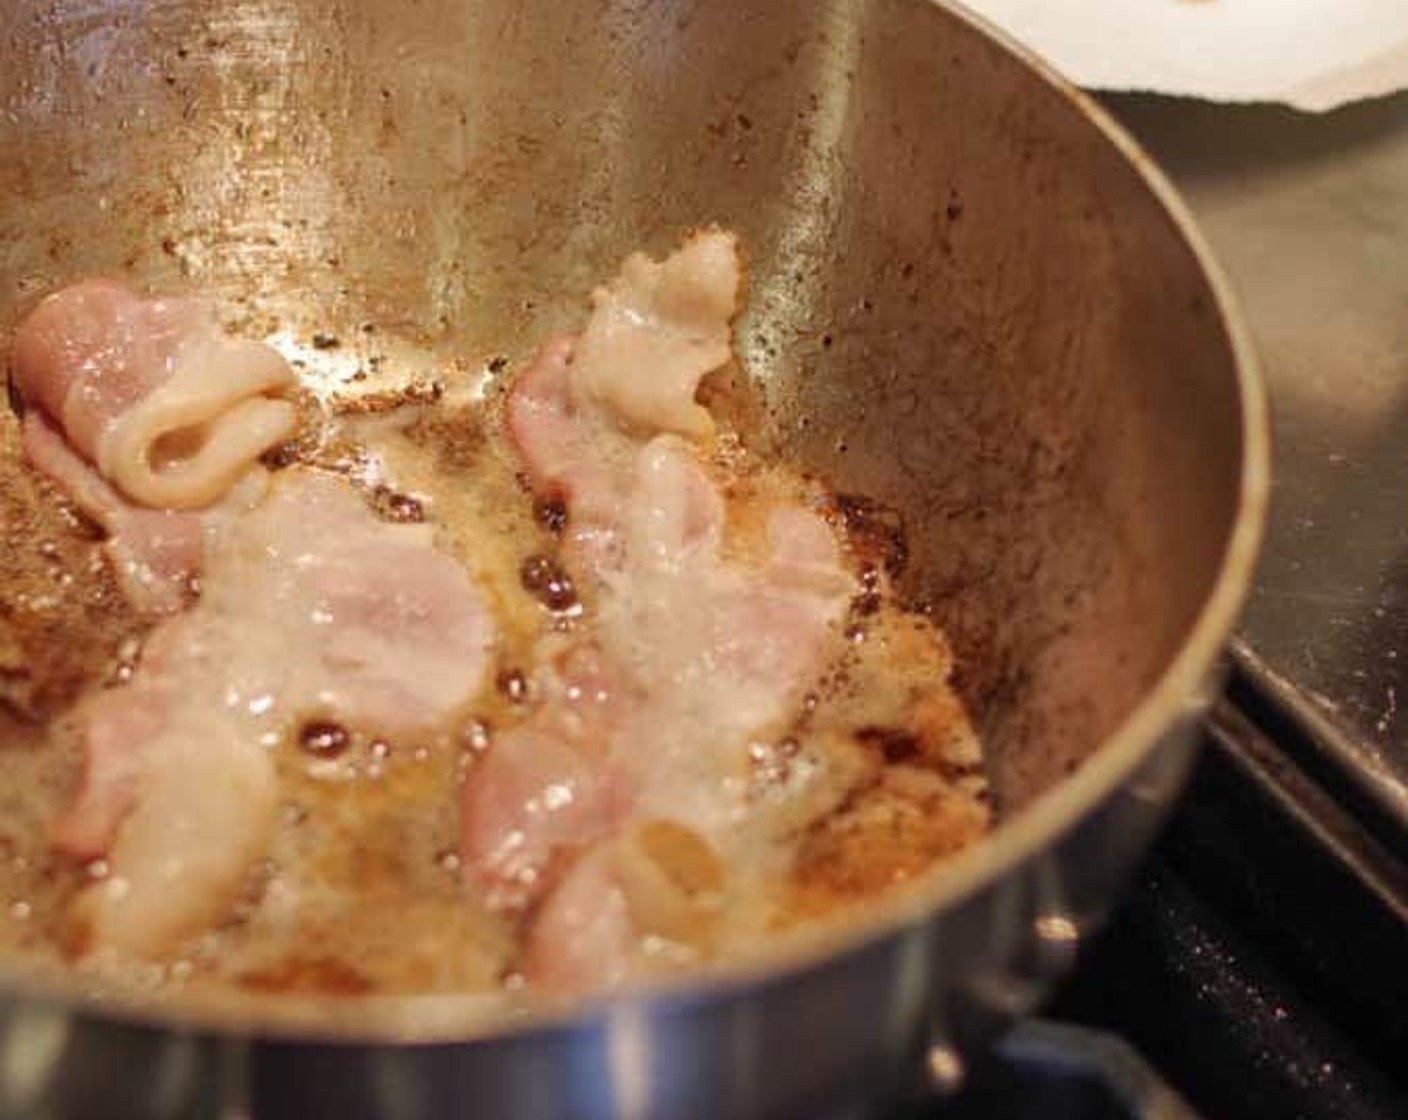 step 4 Add Bacon (8 oz) to skillet and cook over medium heat until crispy. Remove bacon to a paper towel-lined plate. Once the bacon has cooled, chop it into small bits.